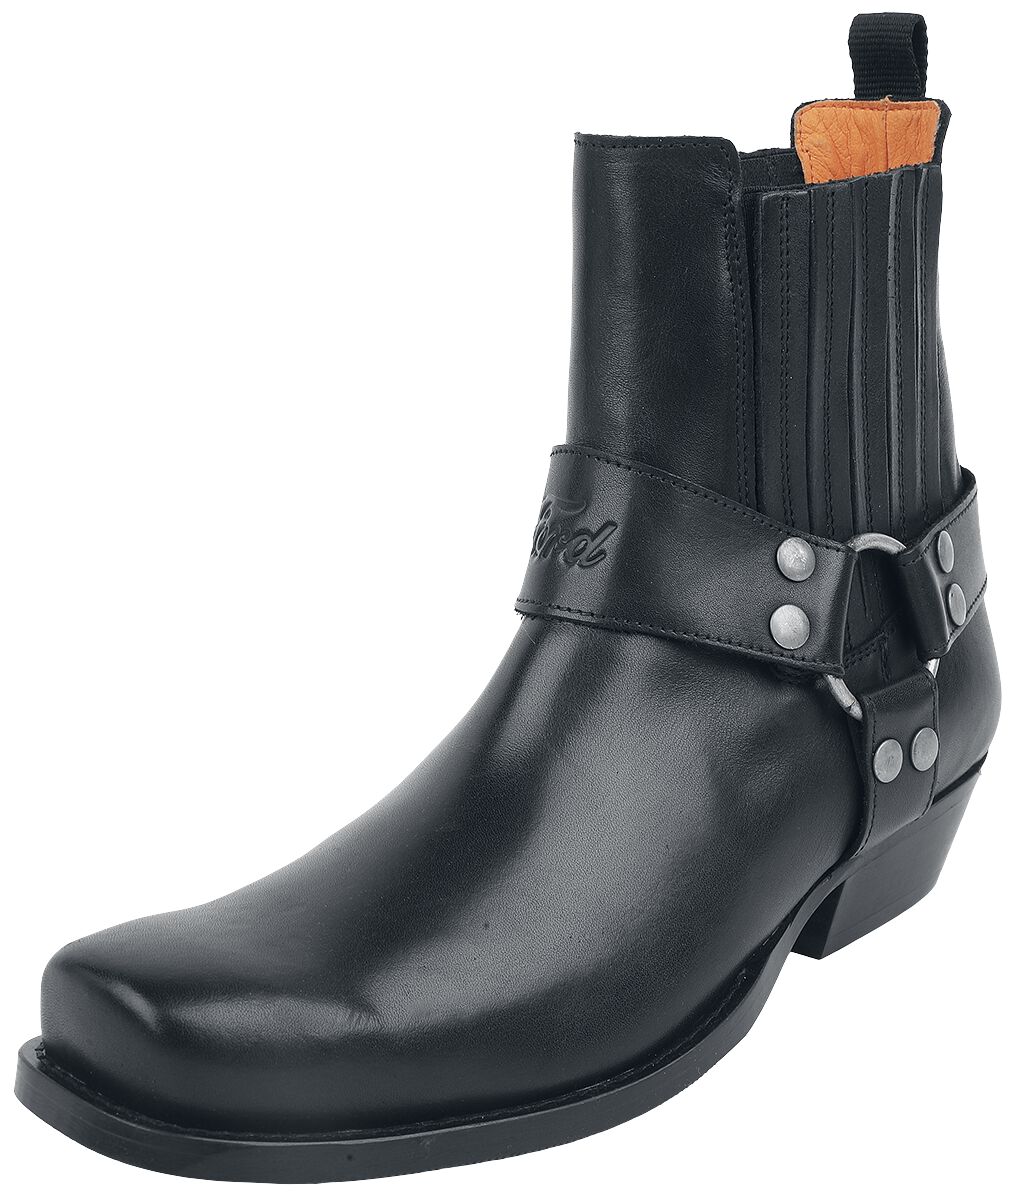 Image of Ford Cowboy Boots schwarz